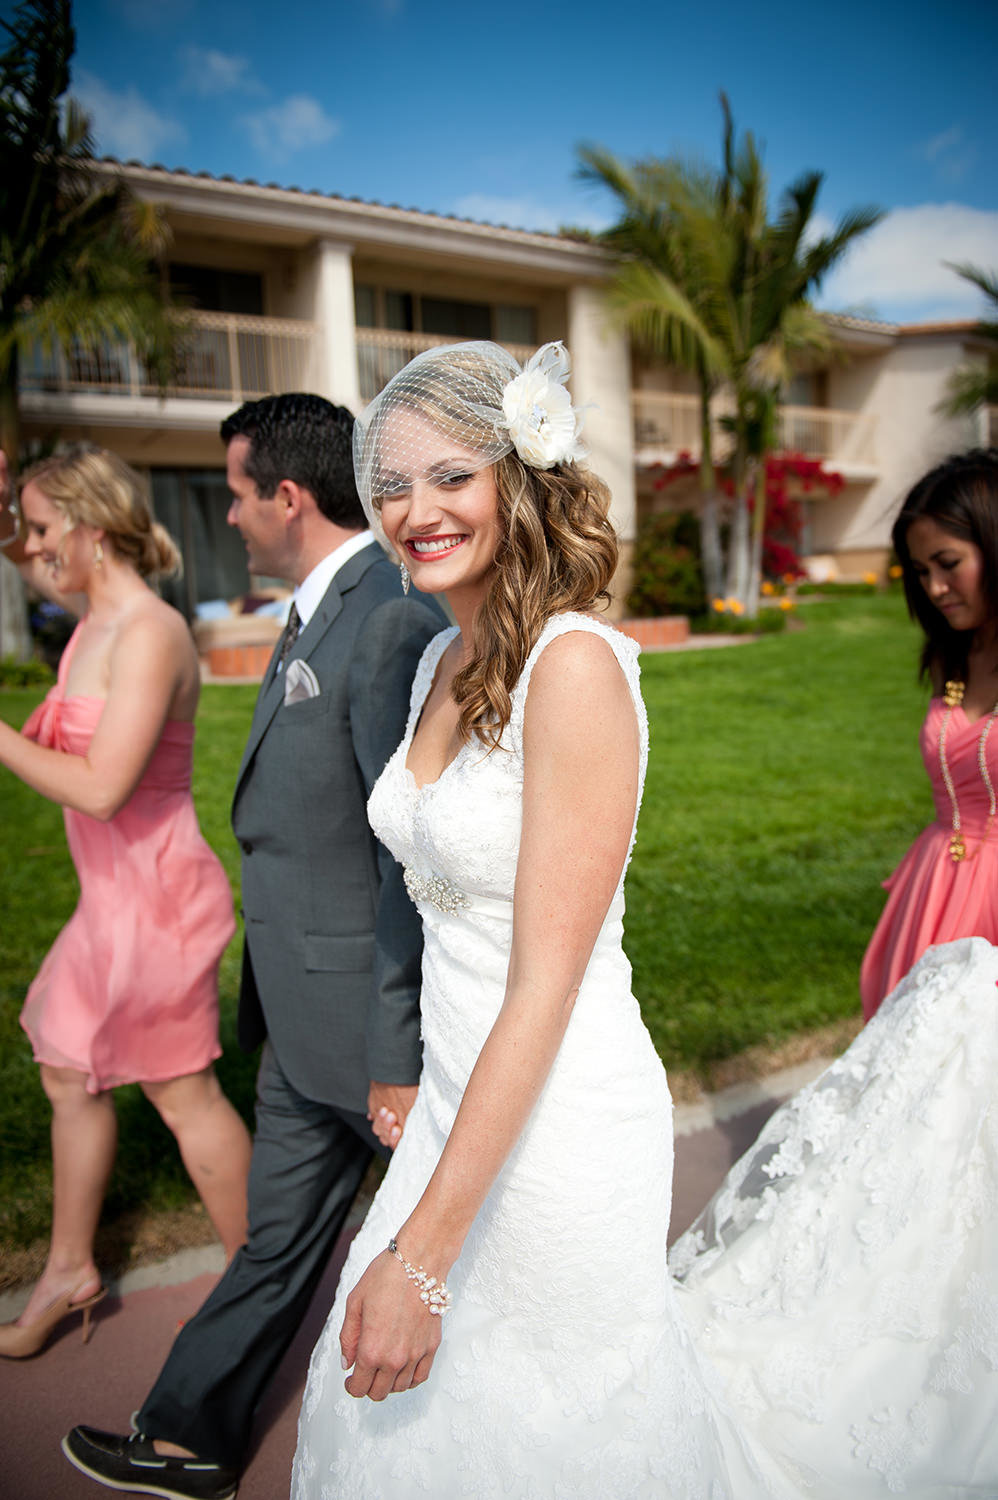 Bride walking with bridal party at hilton mission bay